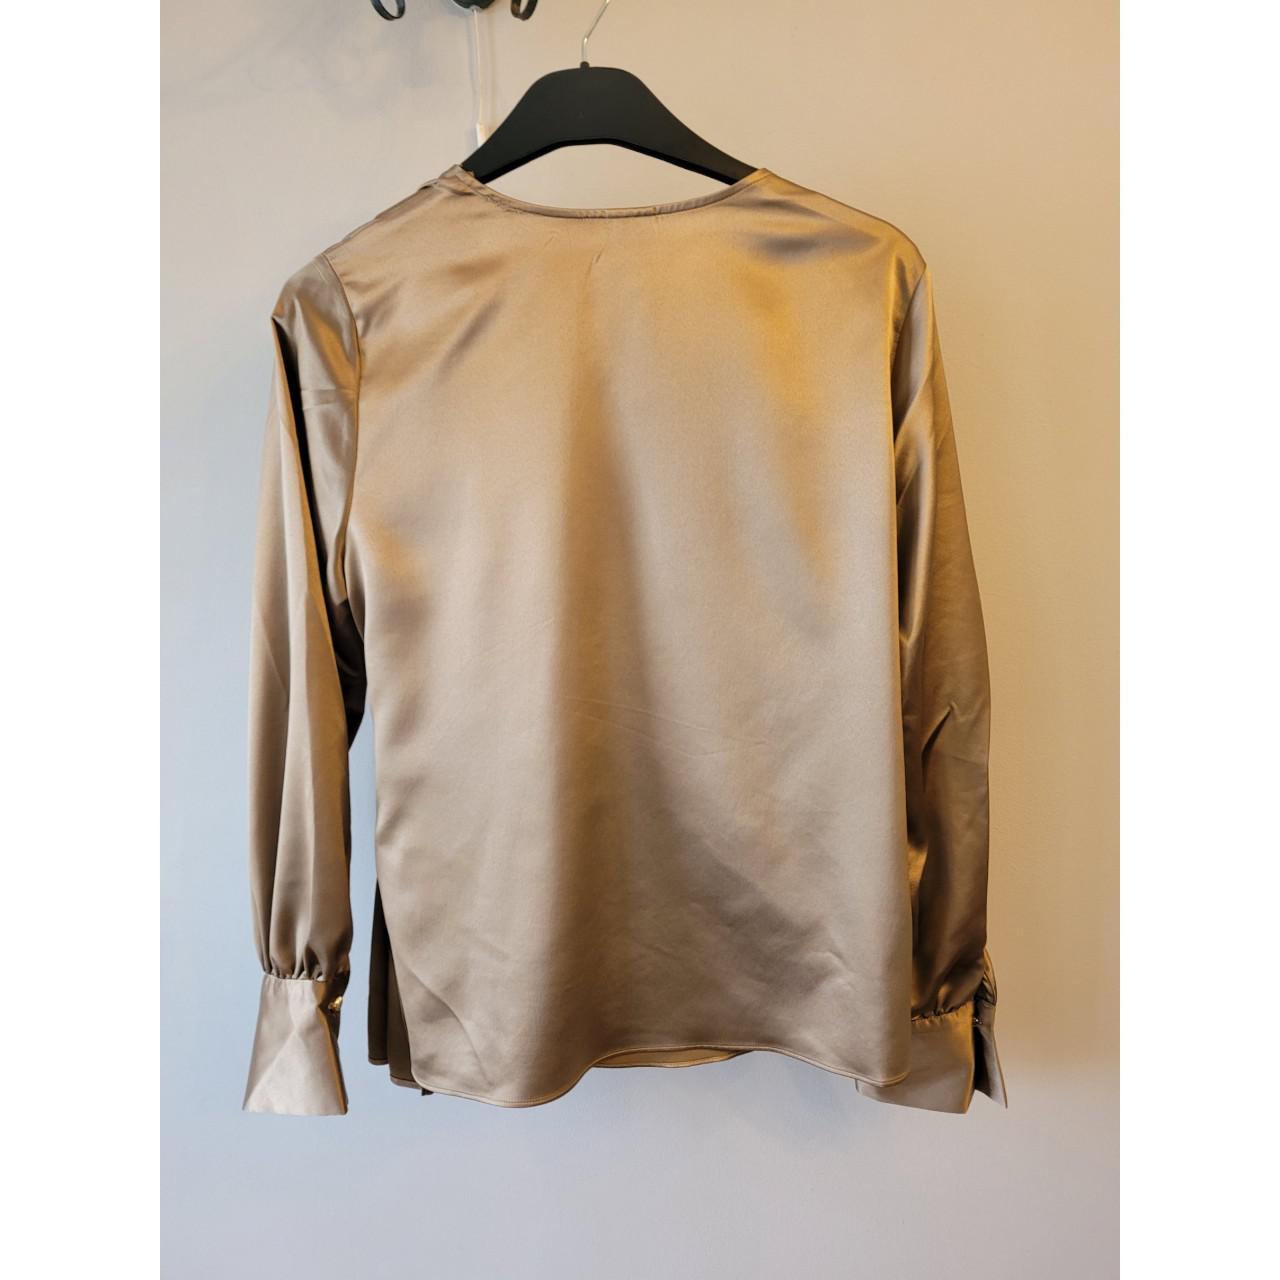 River Island Women's Tan and Gold Blouse (3)